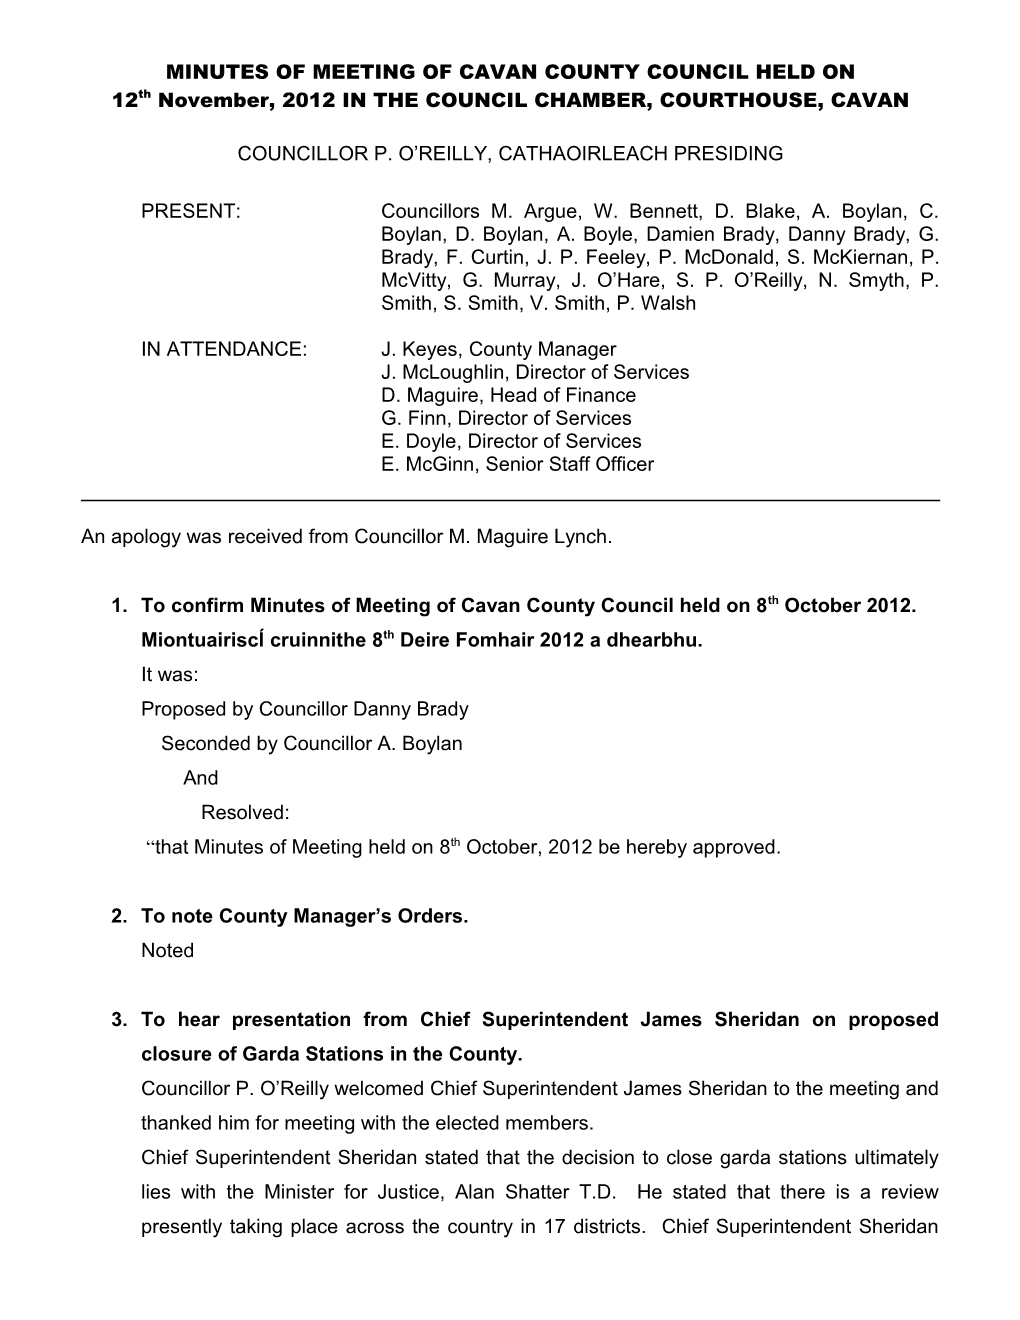 Minutes of Council Meeting Held on 11Th October 2010 s1